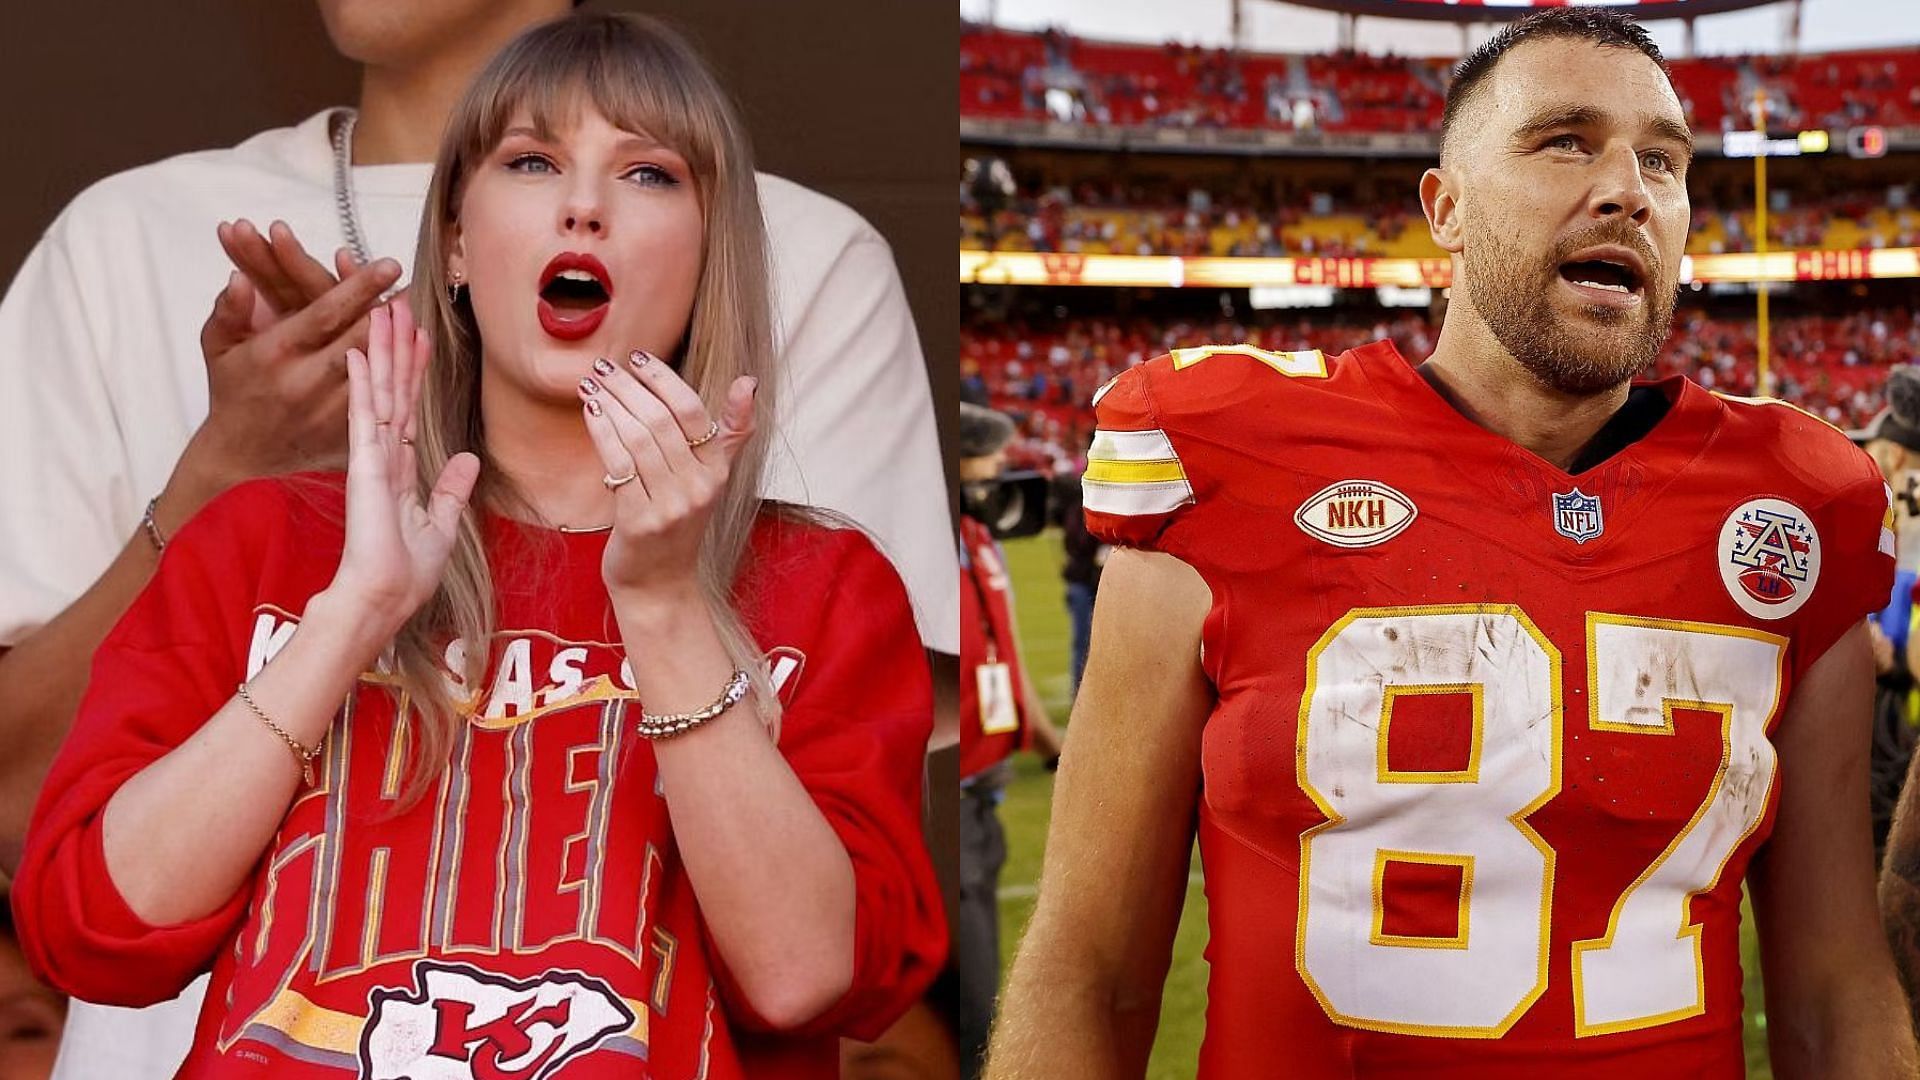 Multi-platinum recording artist Taylor Swift and All-Pro tight end Travis Kelce